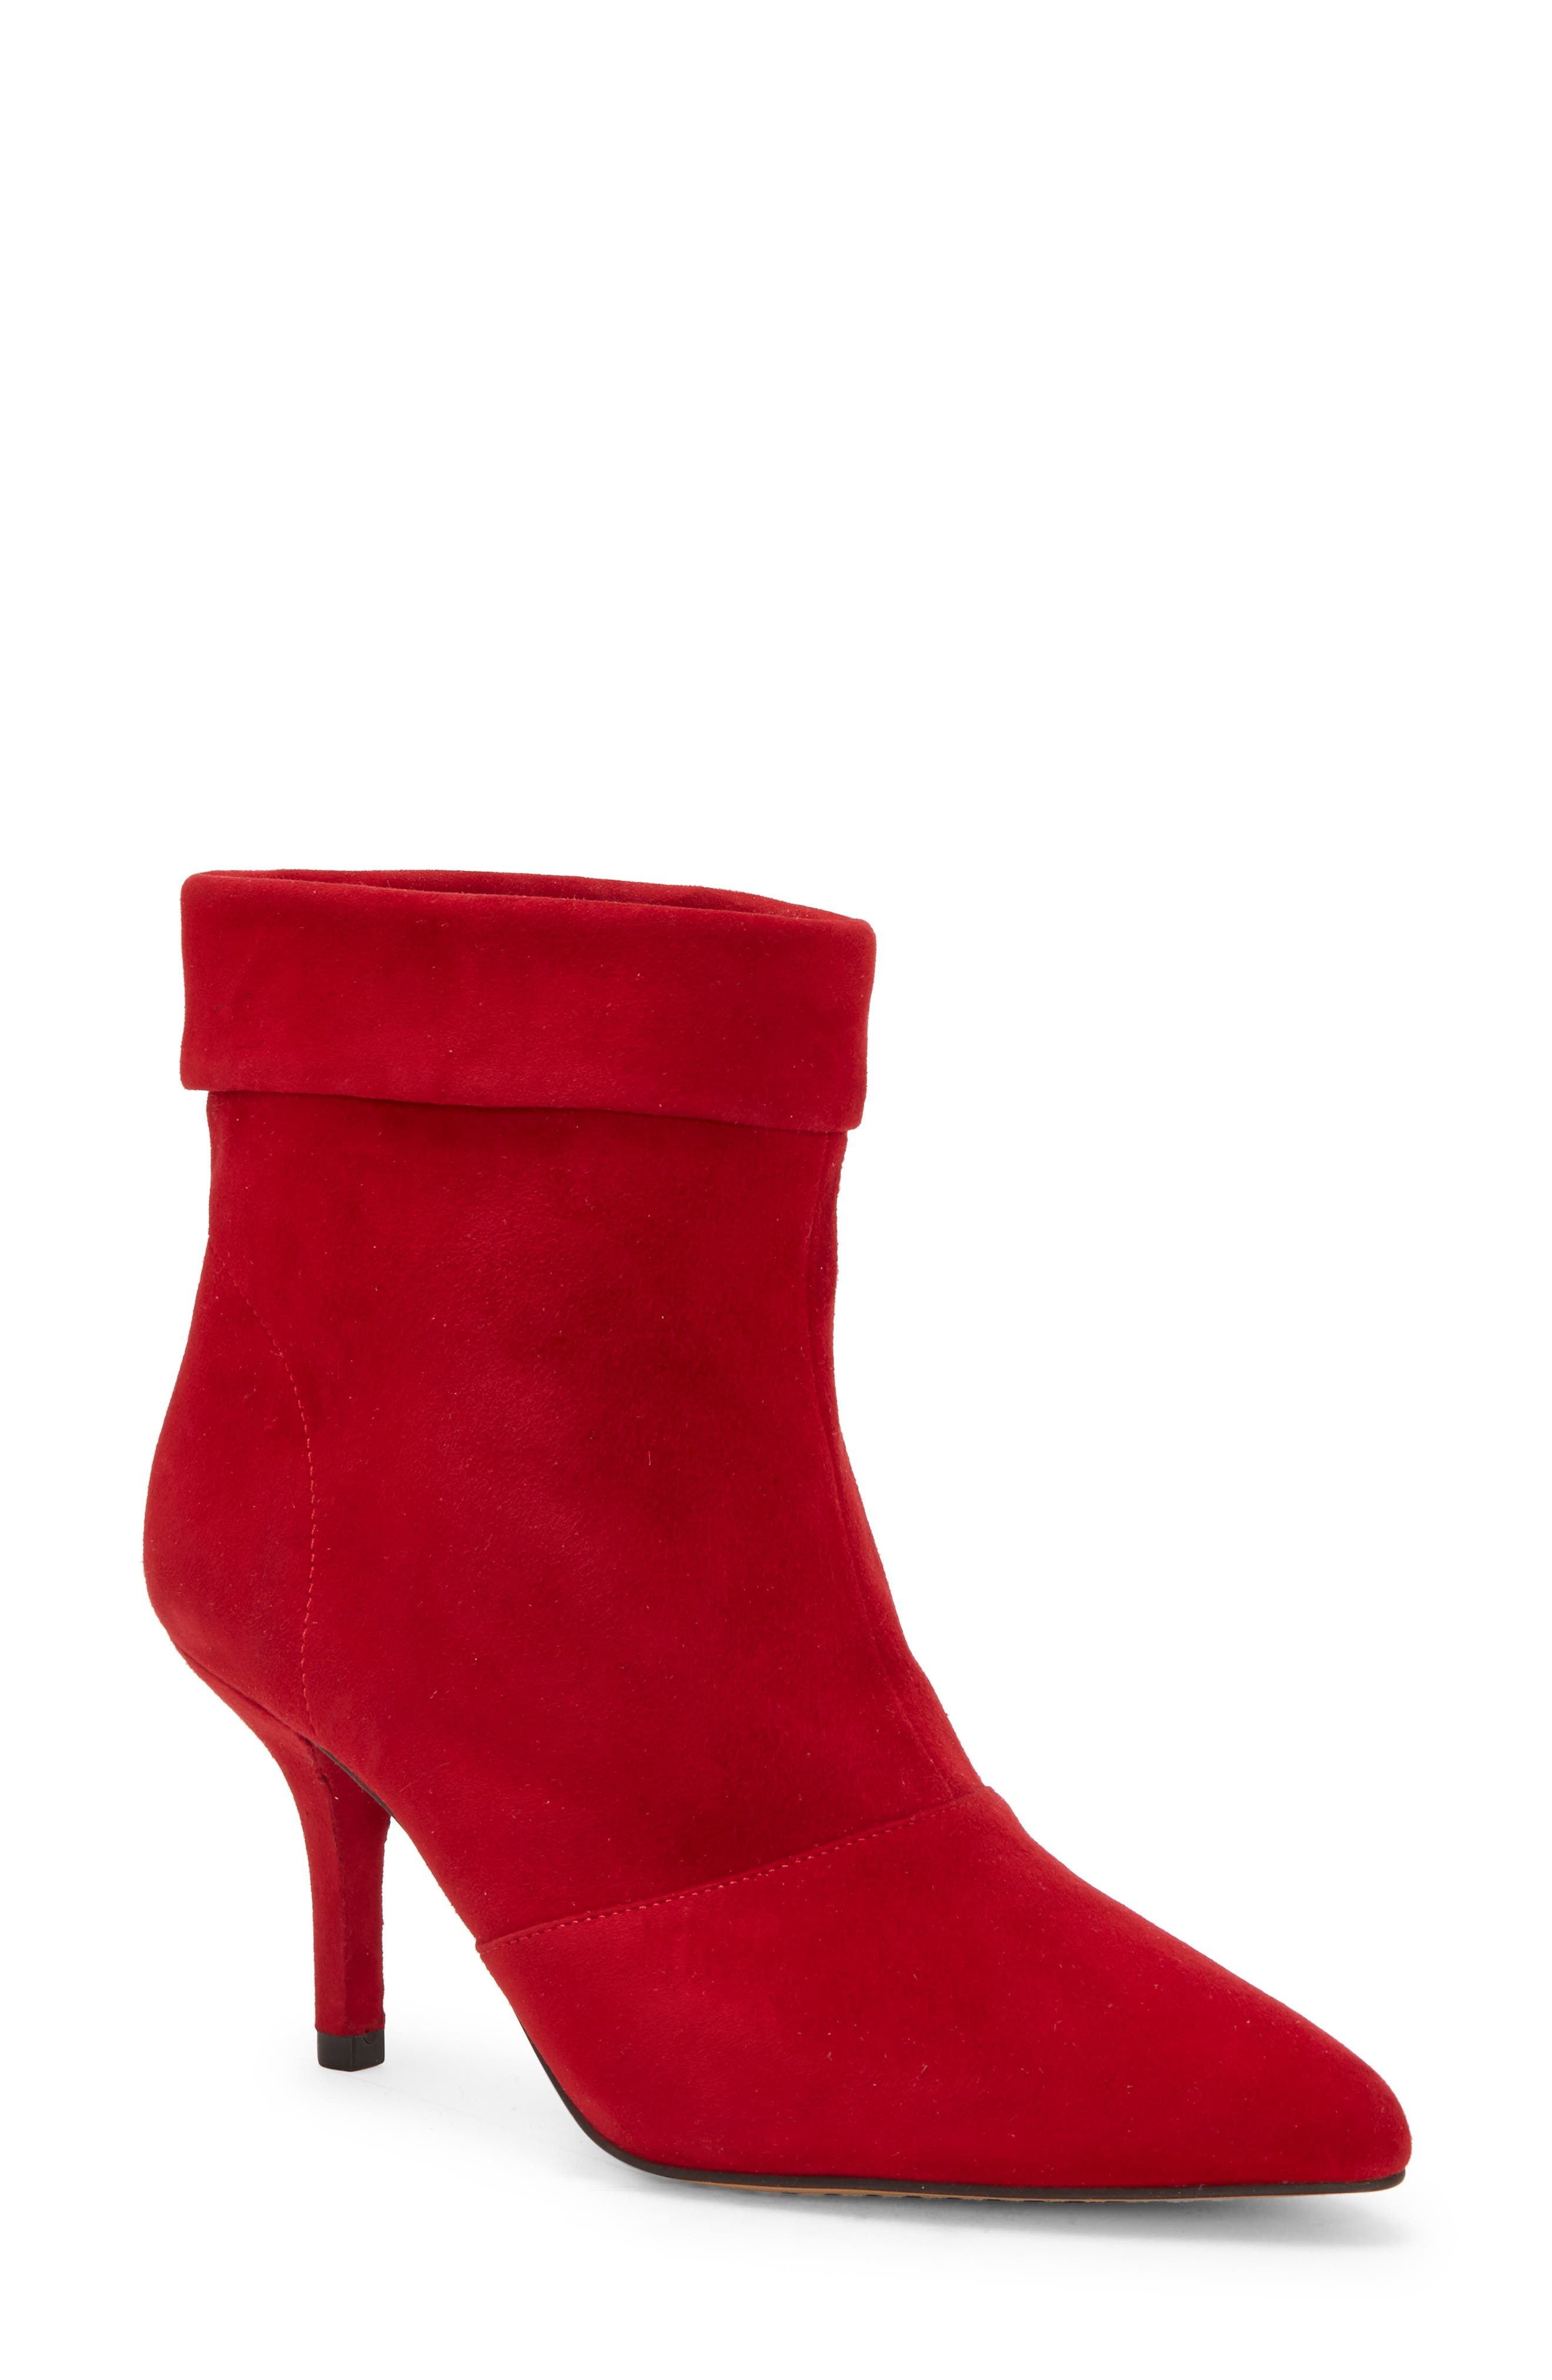 UPC 192151295814 - Women's Vince Camuto Amvita Bootie, Size 7 M - Red ...